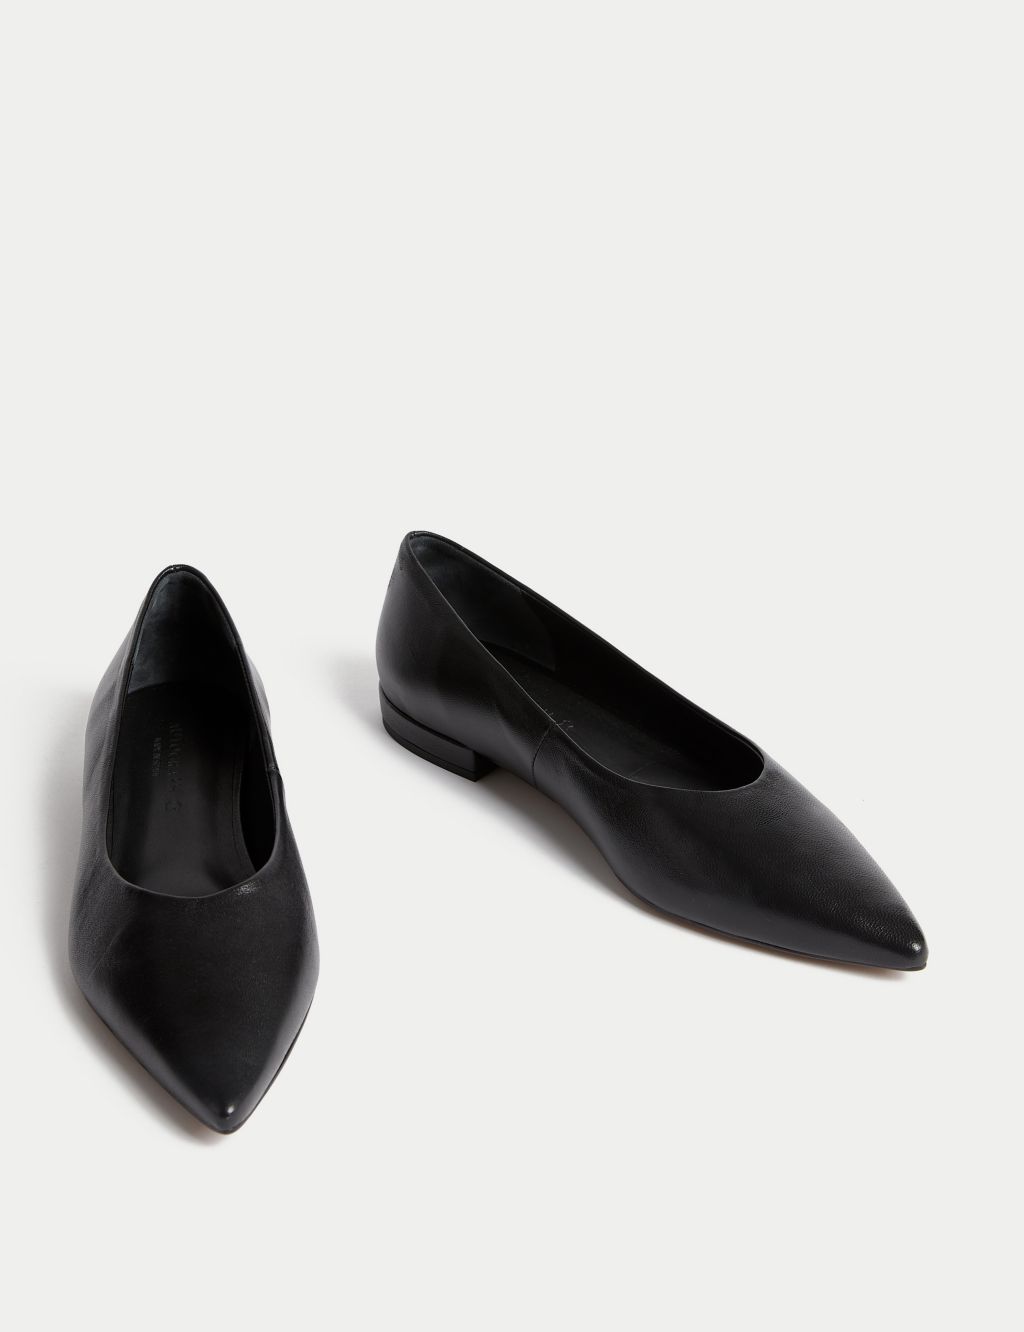 Leather Slip On Flat Pointed Pumps | Autograph | M&S